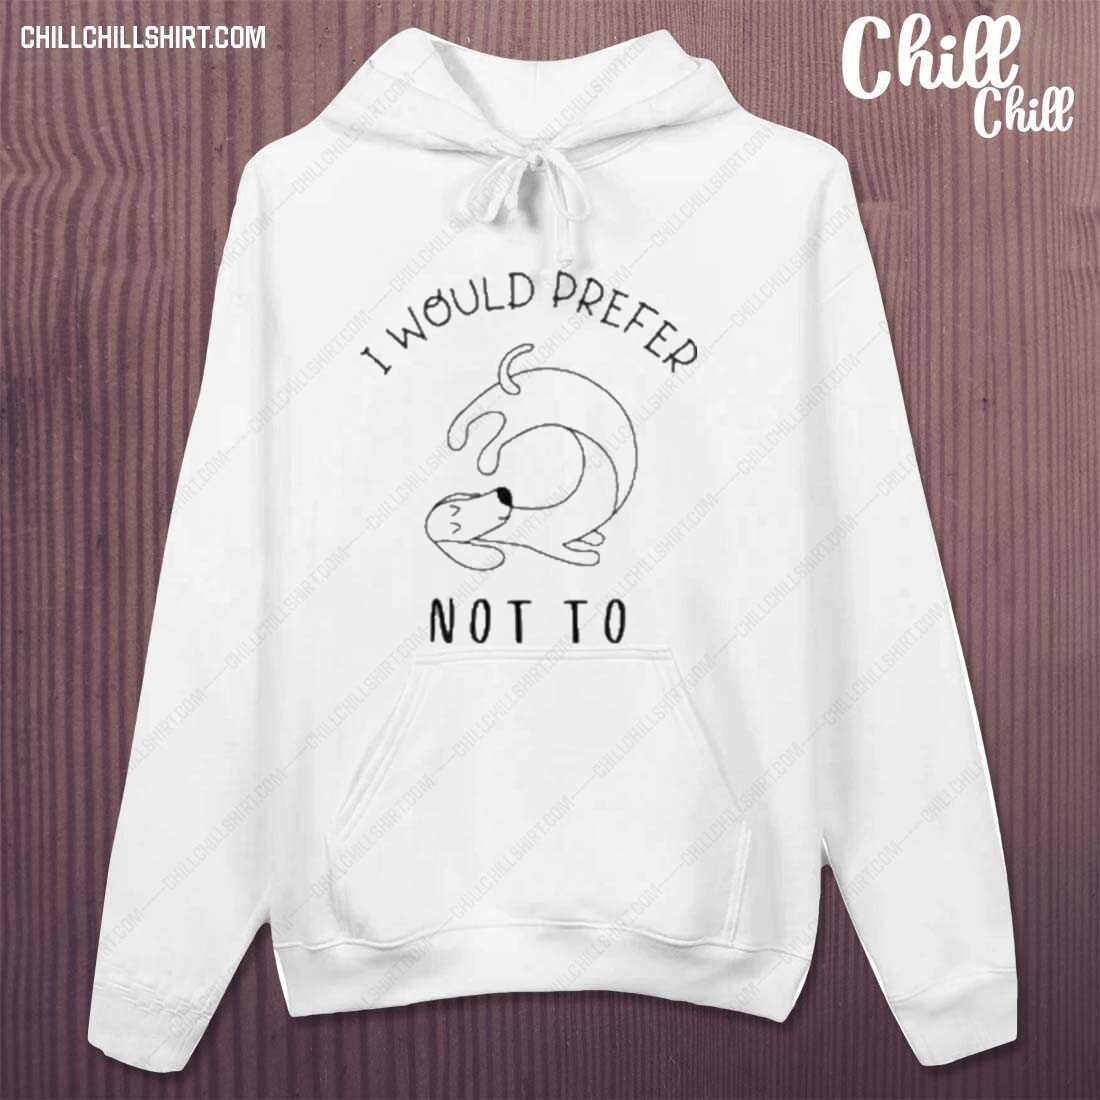 Official i Would Prefer Not To T-s hoodie